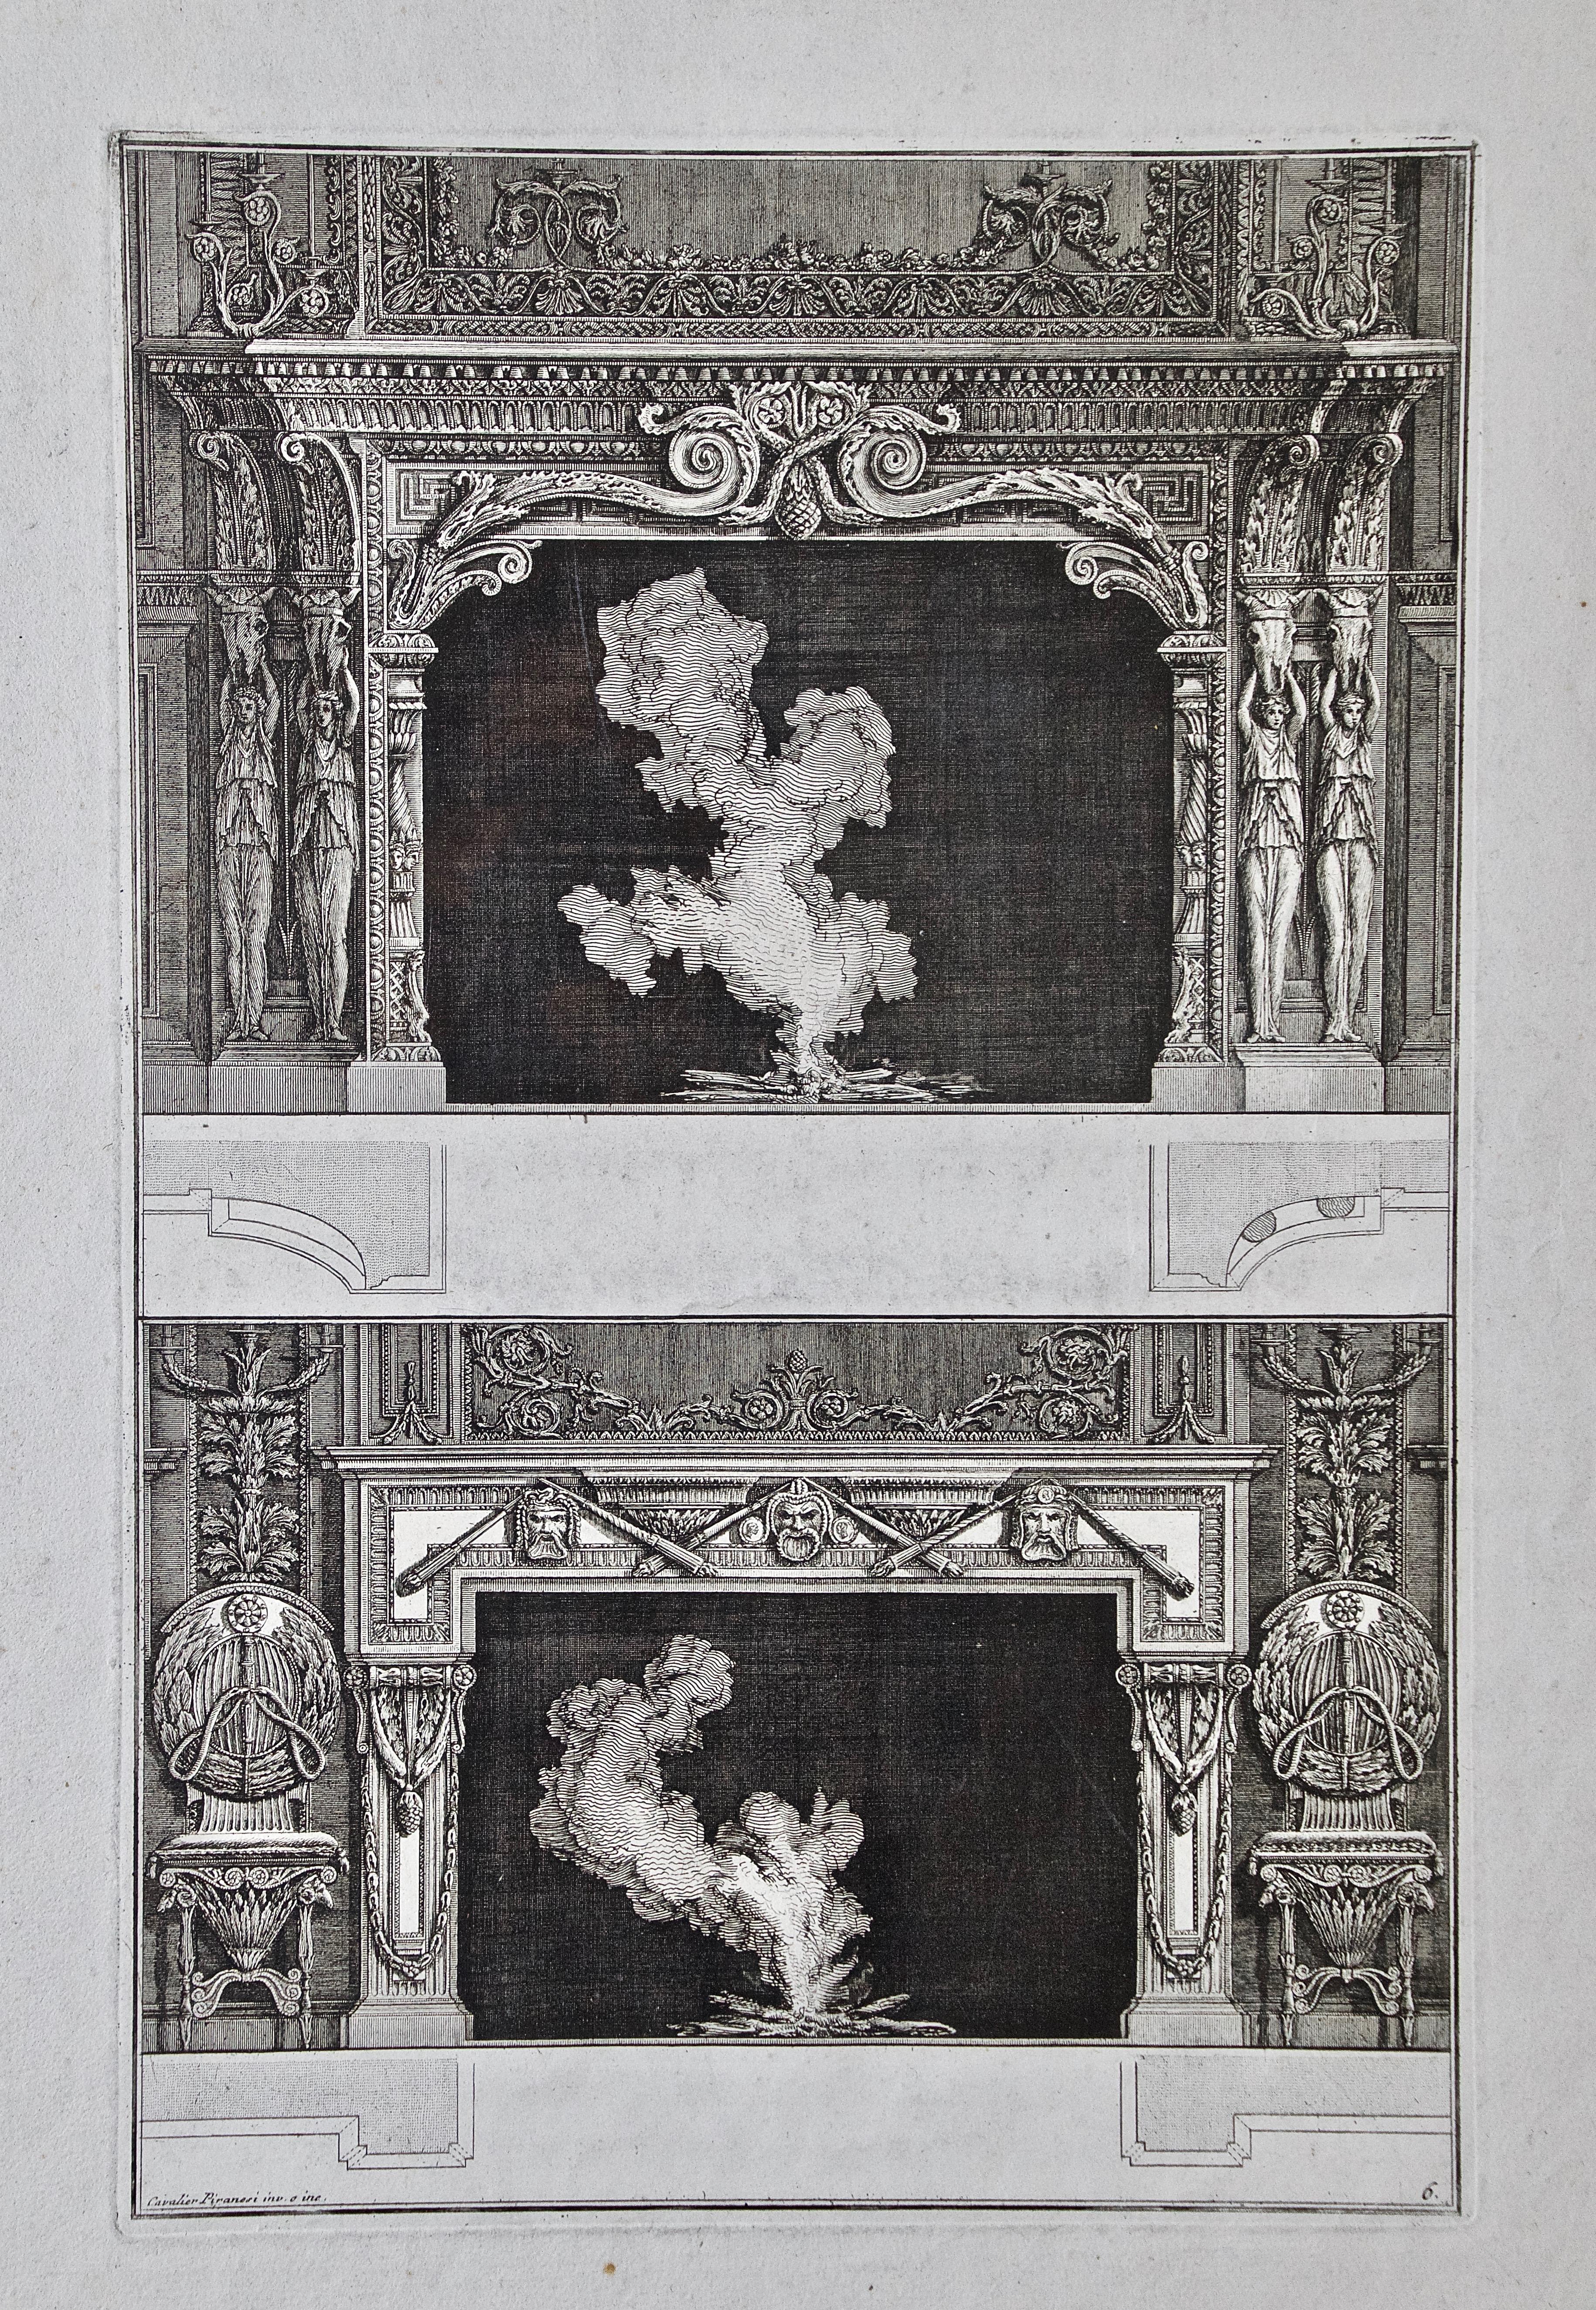 18th C. Piranesi Fireplace Designs based on Ancient Architectural Styles